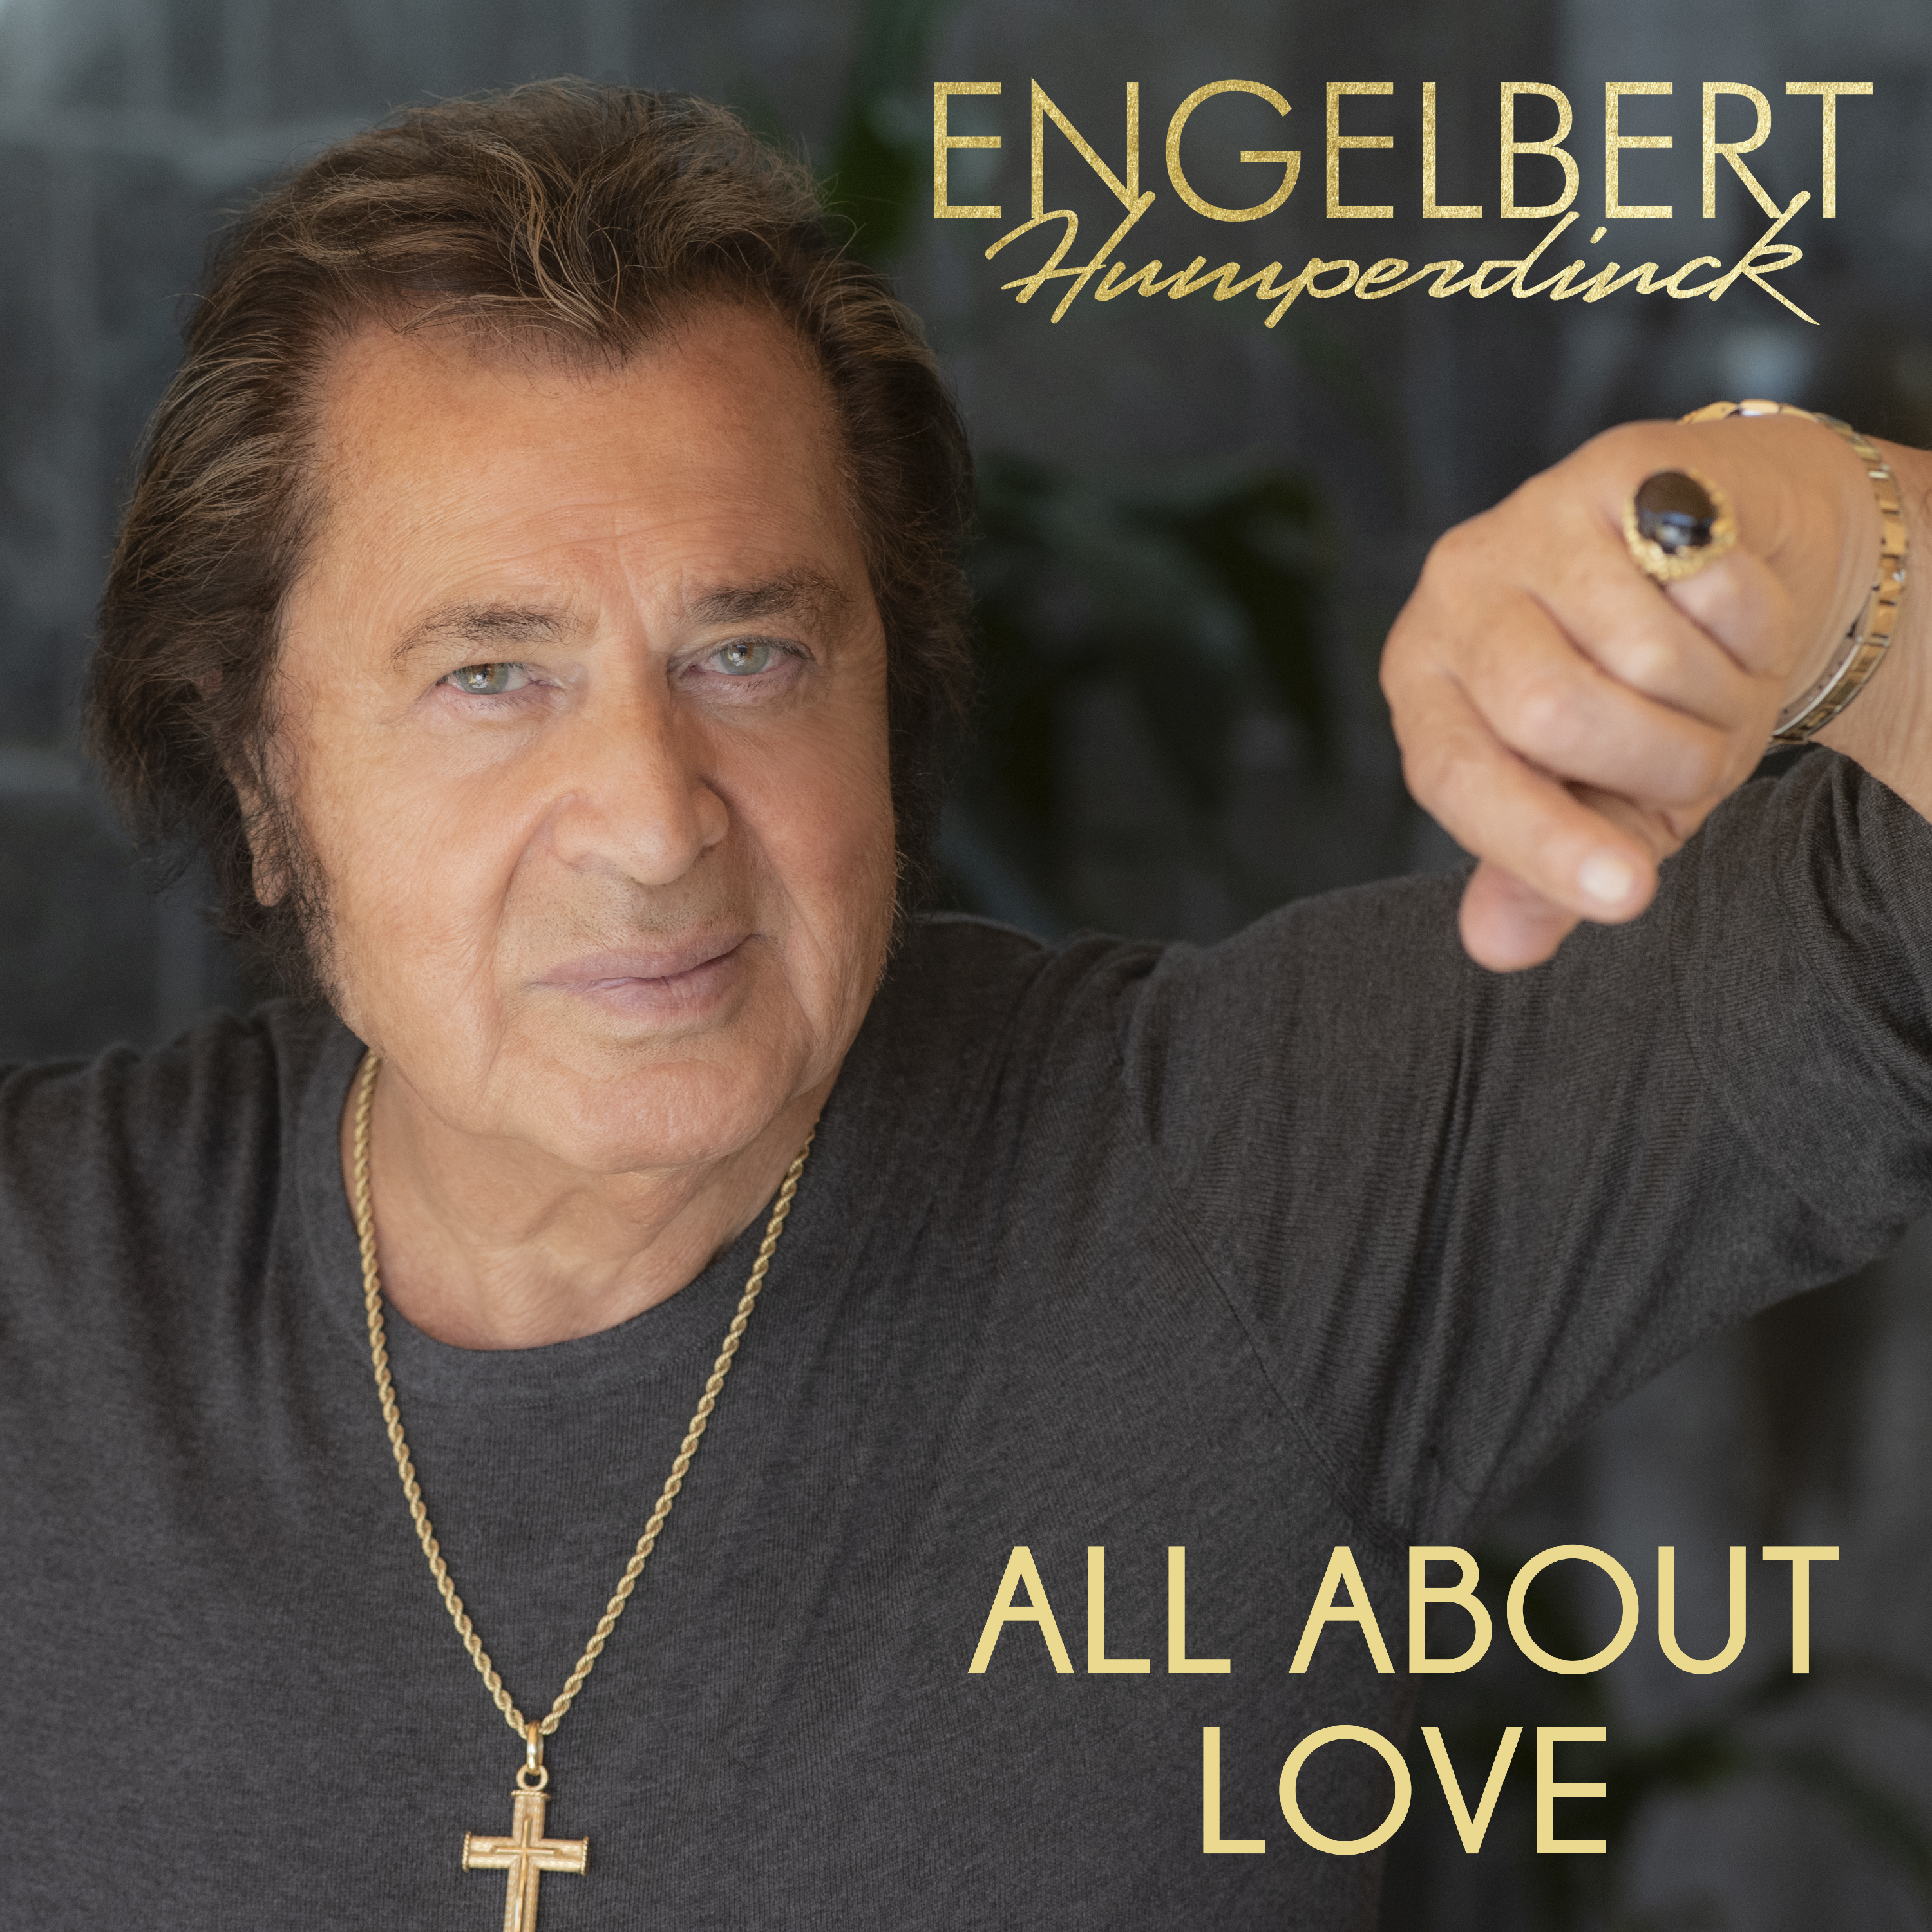 Engelbert Humperdinck Releases 'All About Love' EP Featuring New Singles & Live-Set Favorites